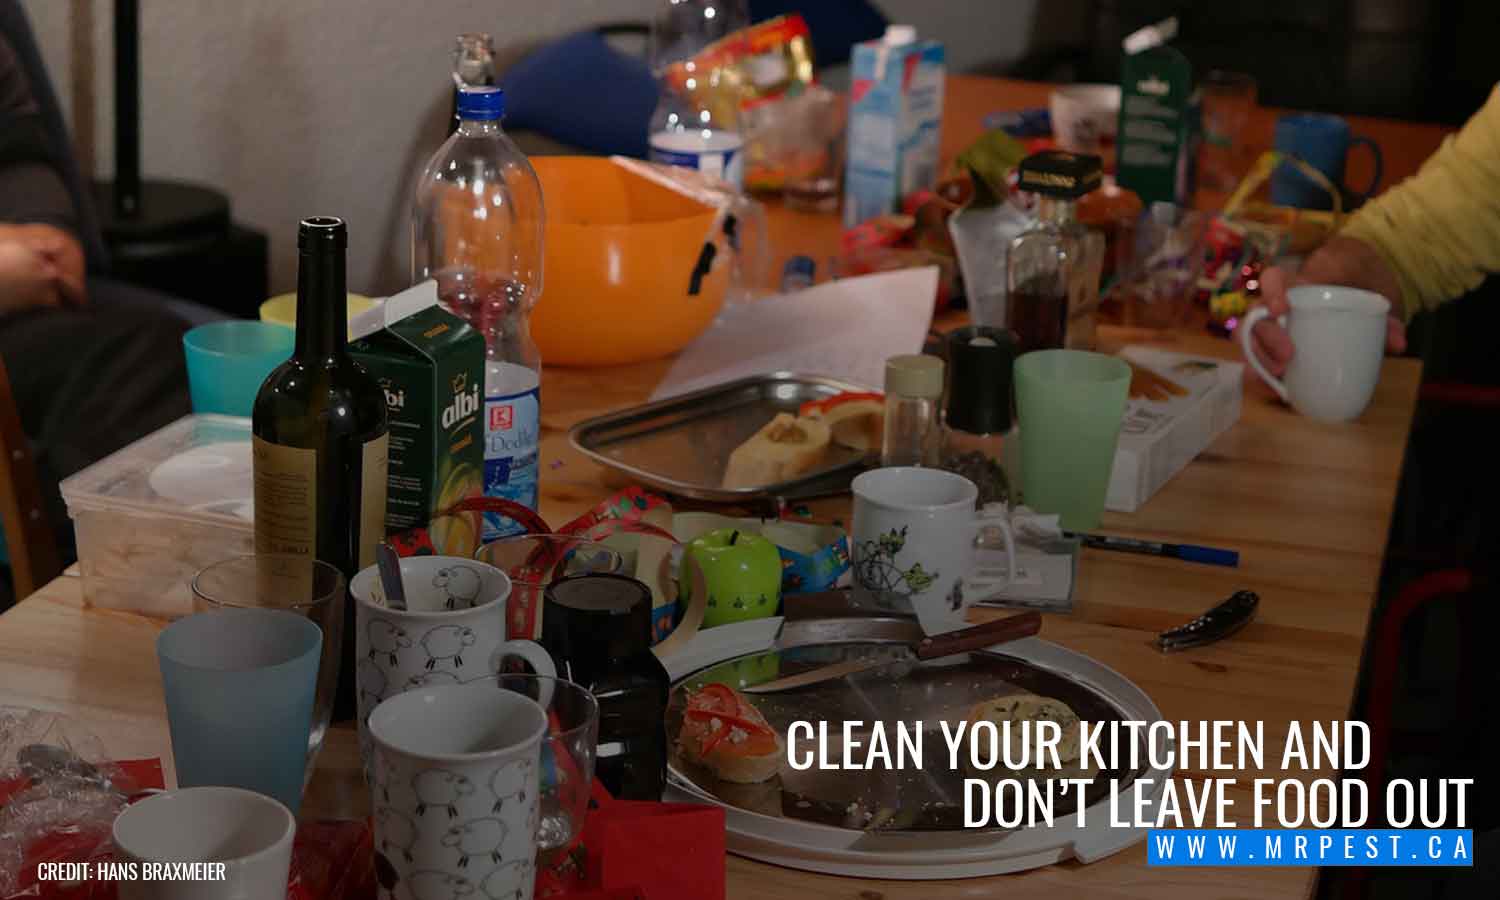  Clean your kitchen and don’t leave food out